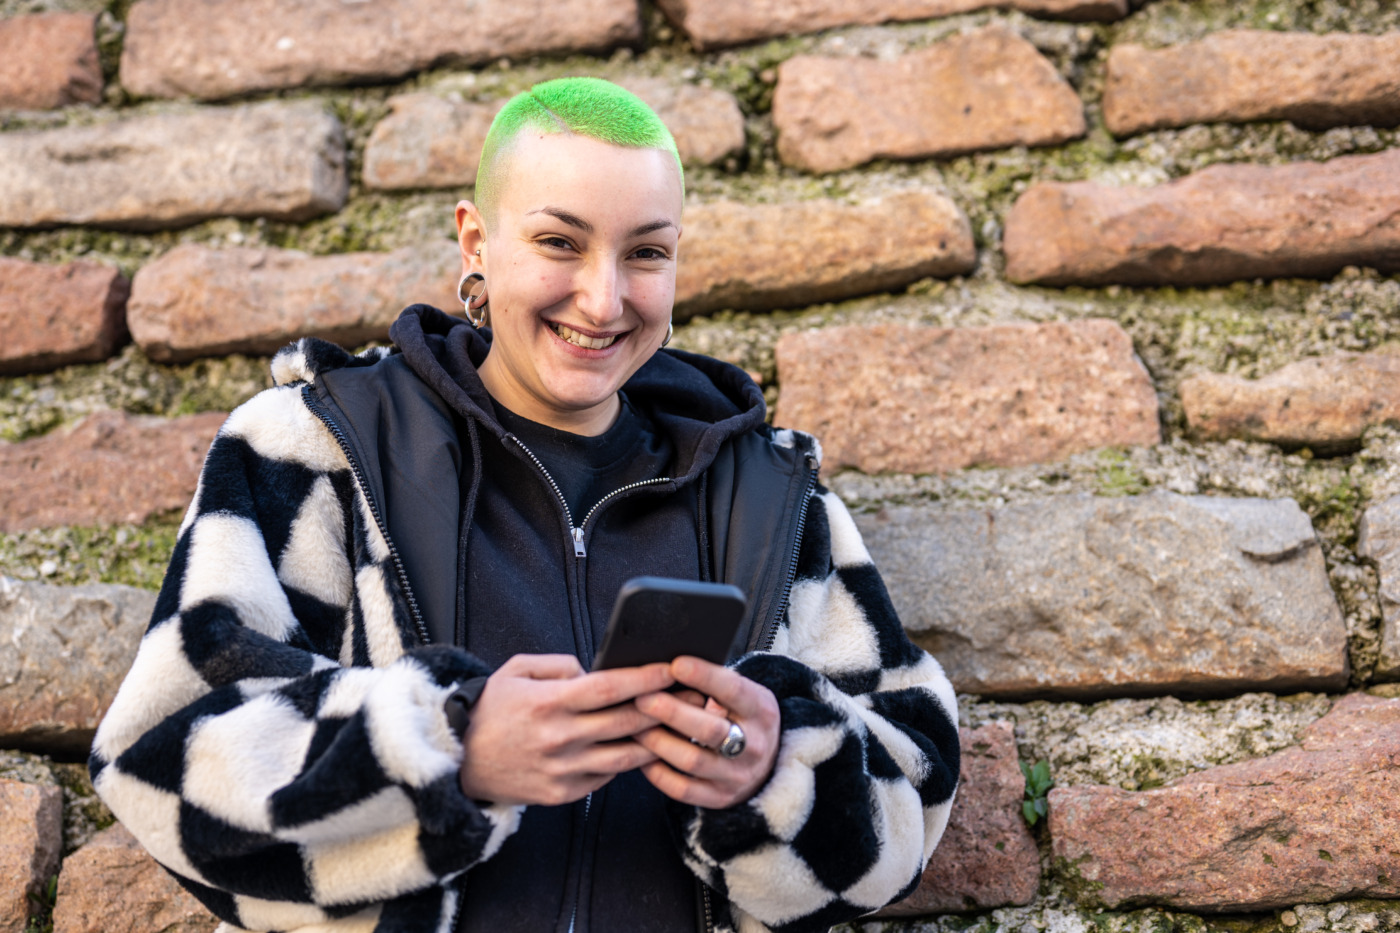 portrait of young person with green hair on their phone 